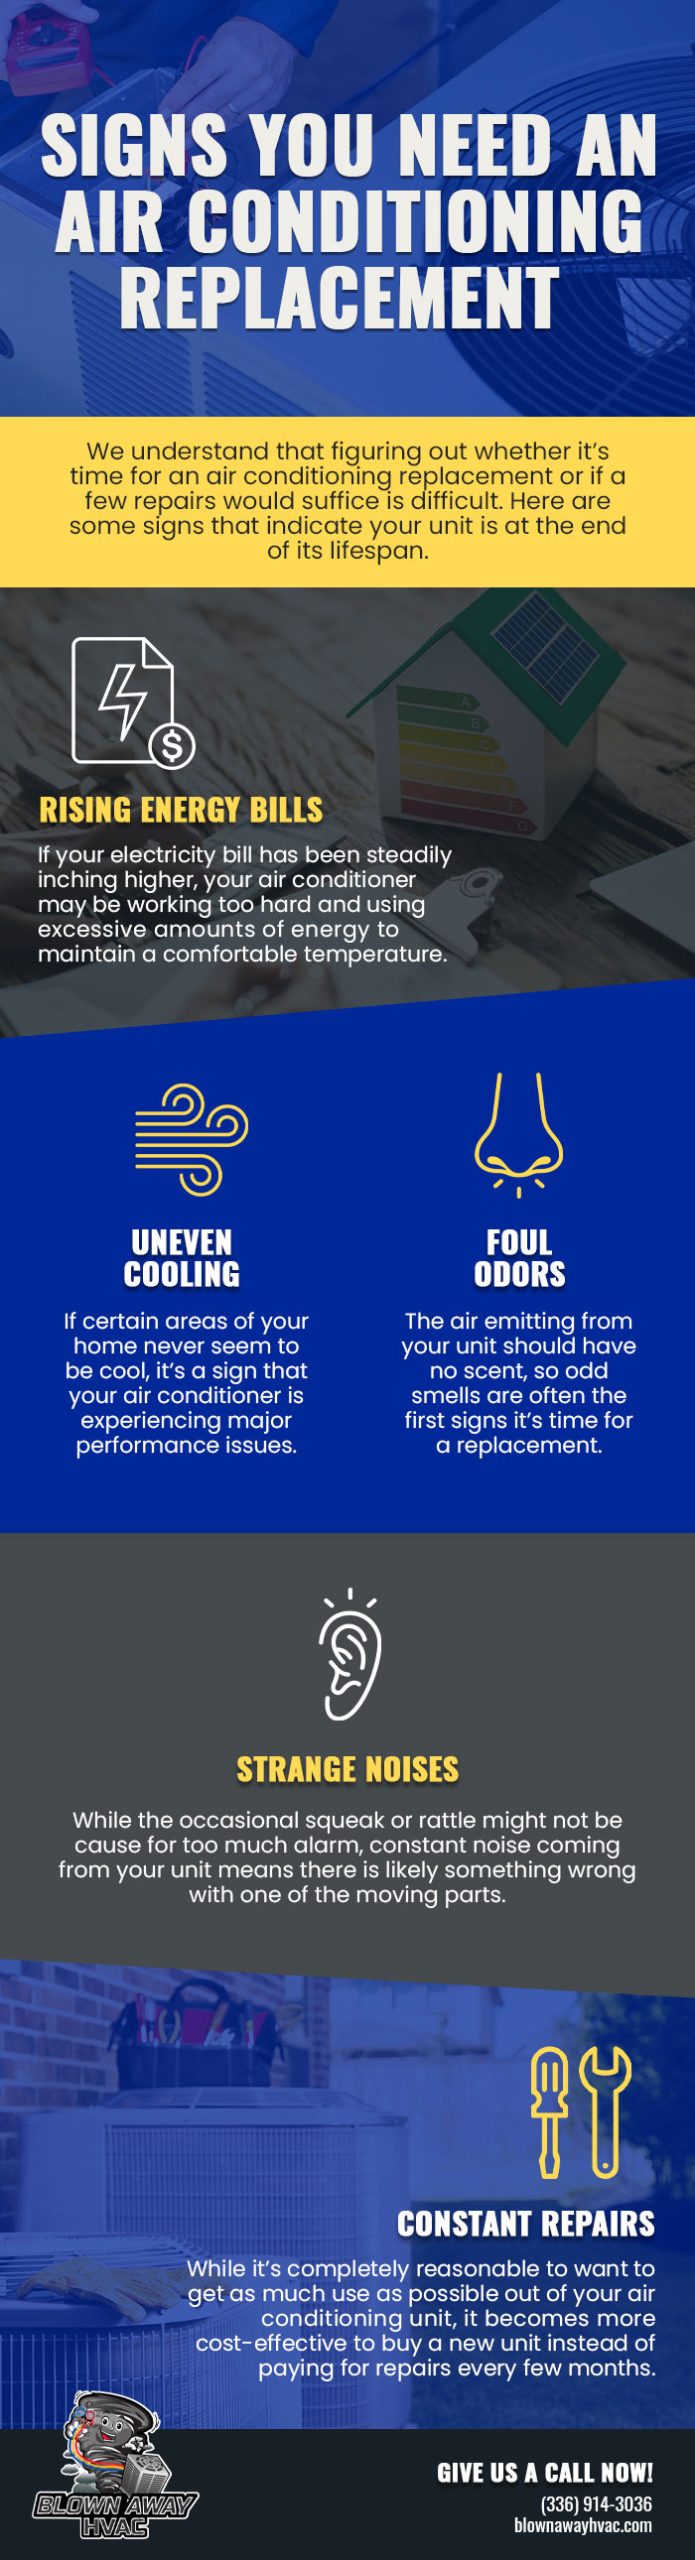 Common Signs that Indicate You Need An Air Conditioning Replacement